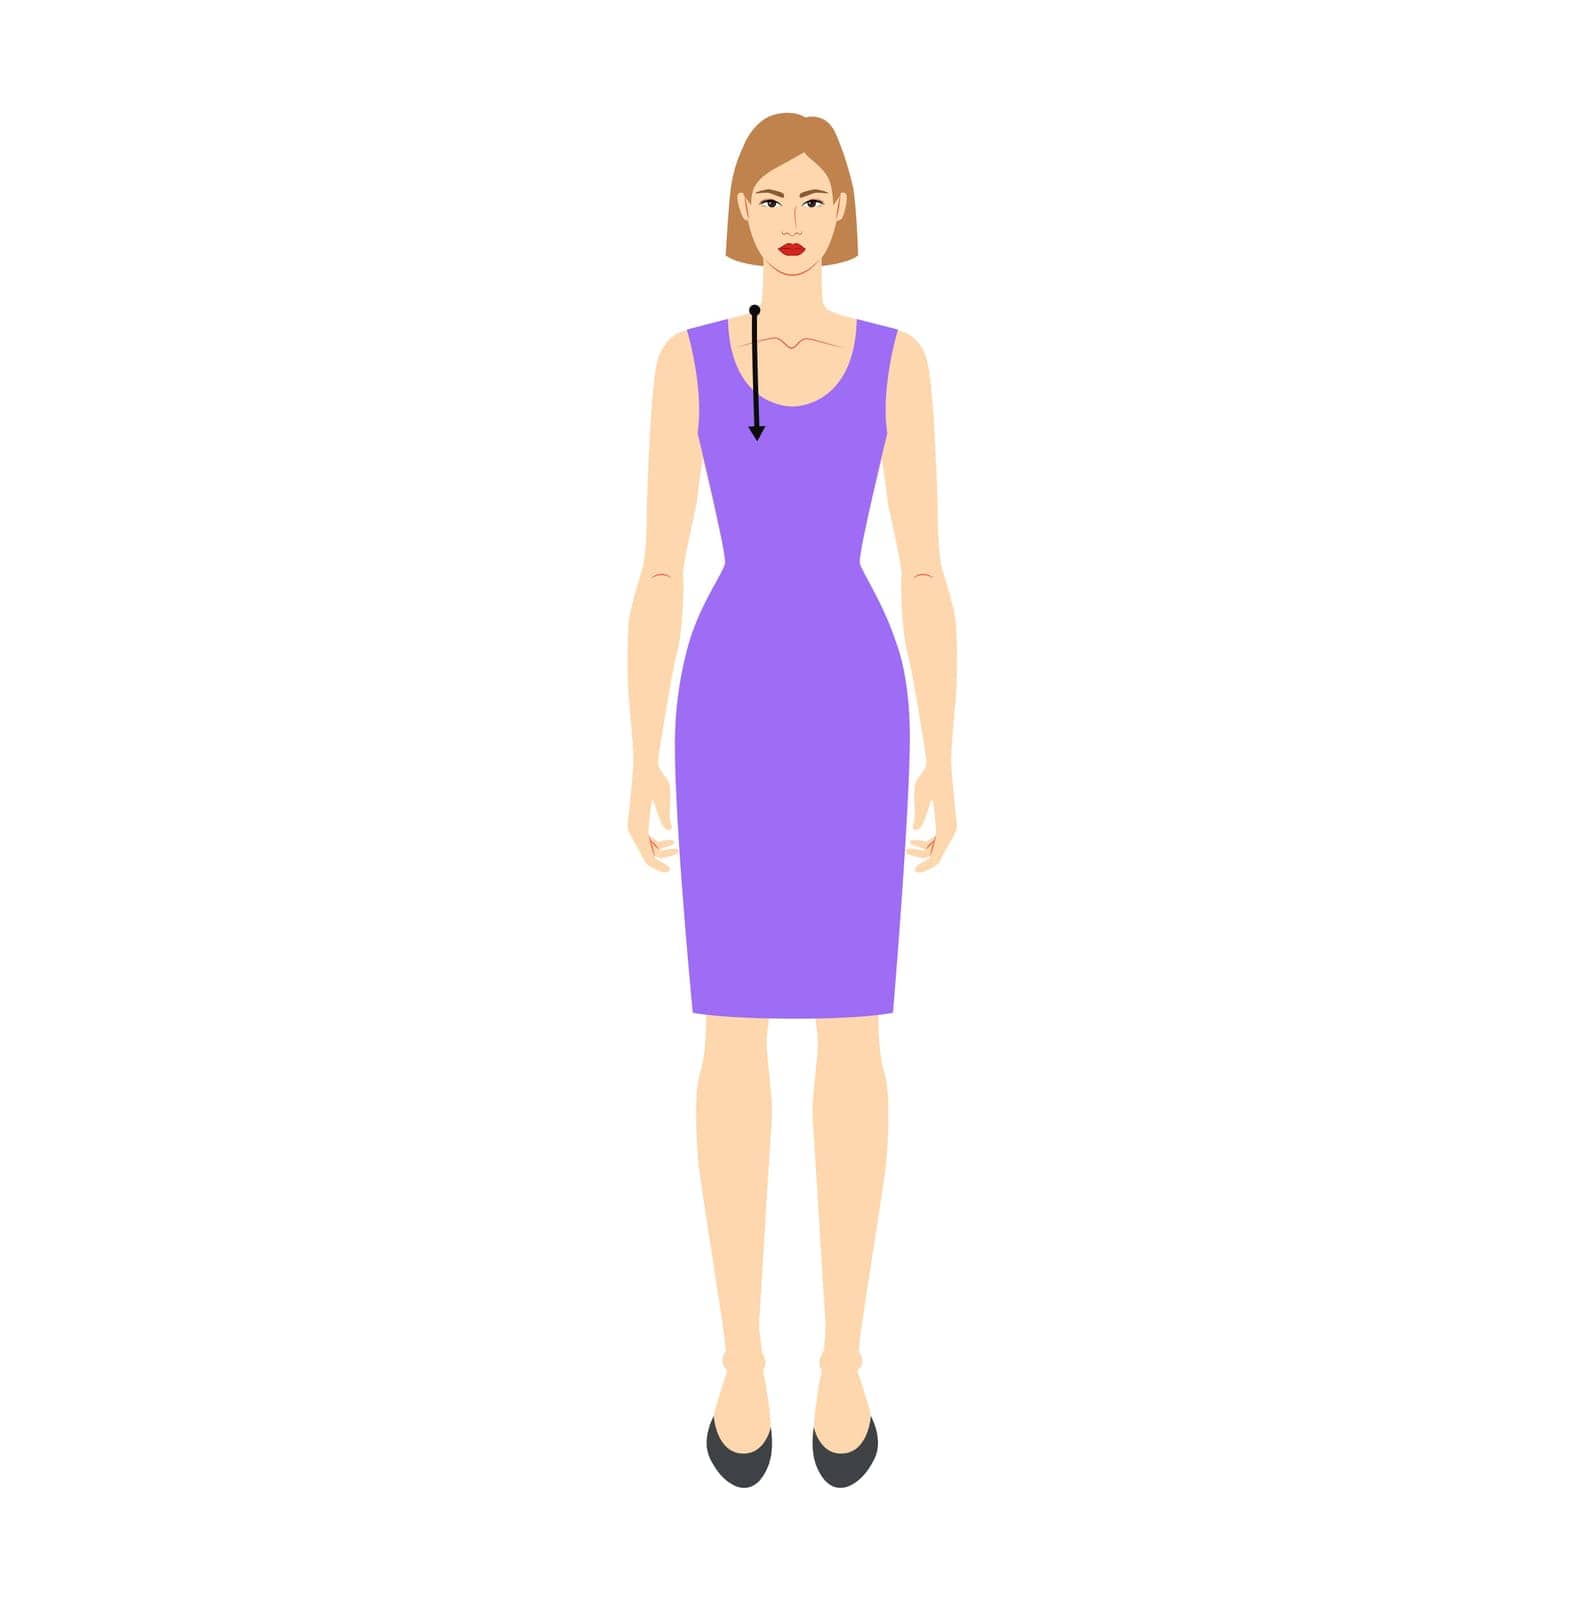 Women to do armscye depth measurement body with arrows fashion Illustration for size chart. Flat female character front 8 head size girl in violet dress. Human lady infographic template for clothes